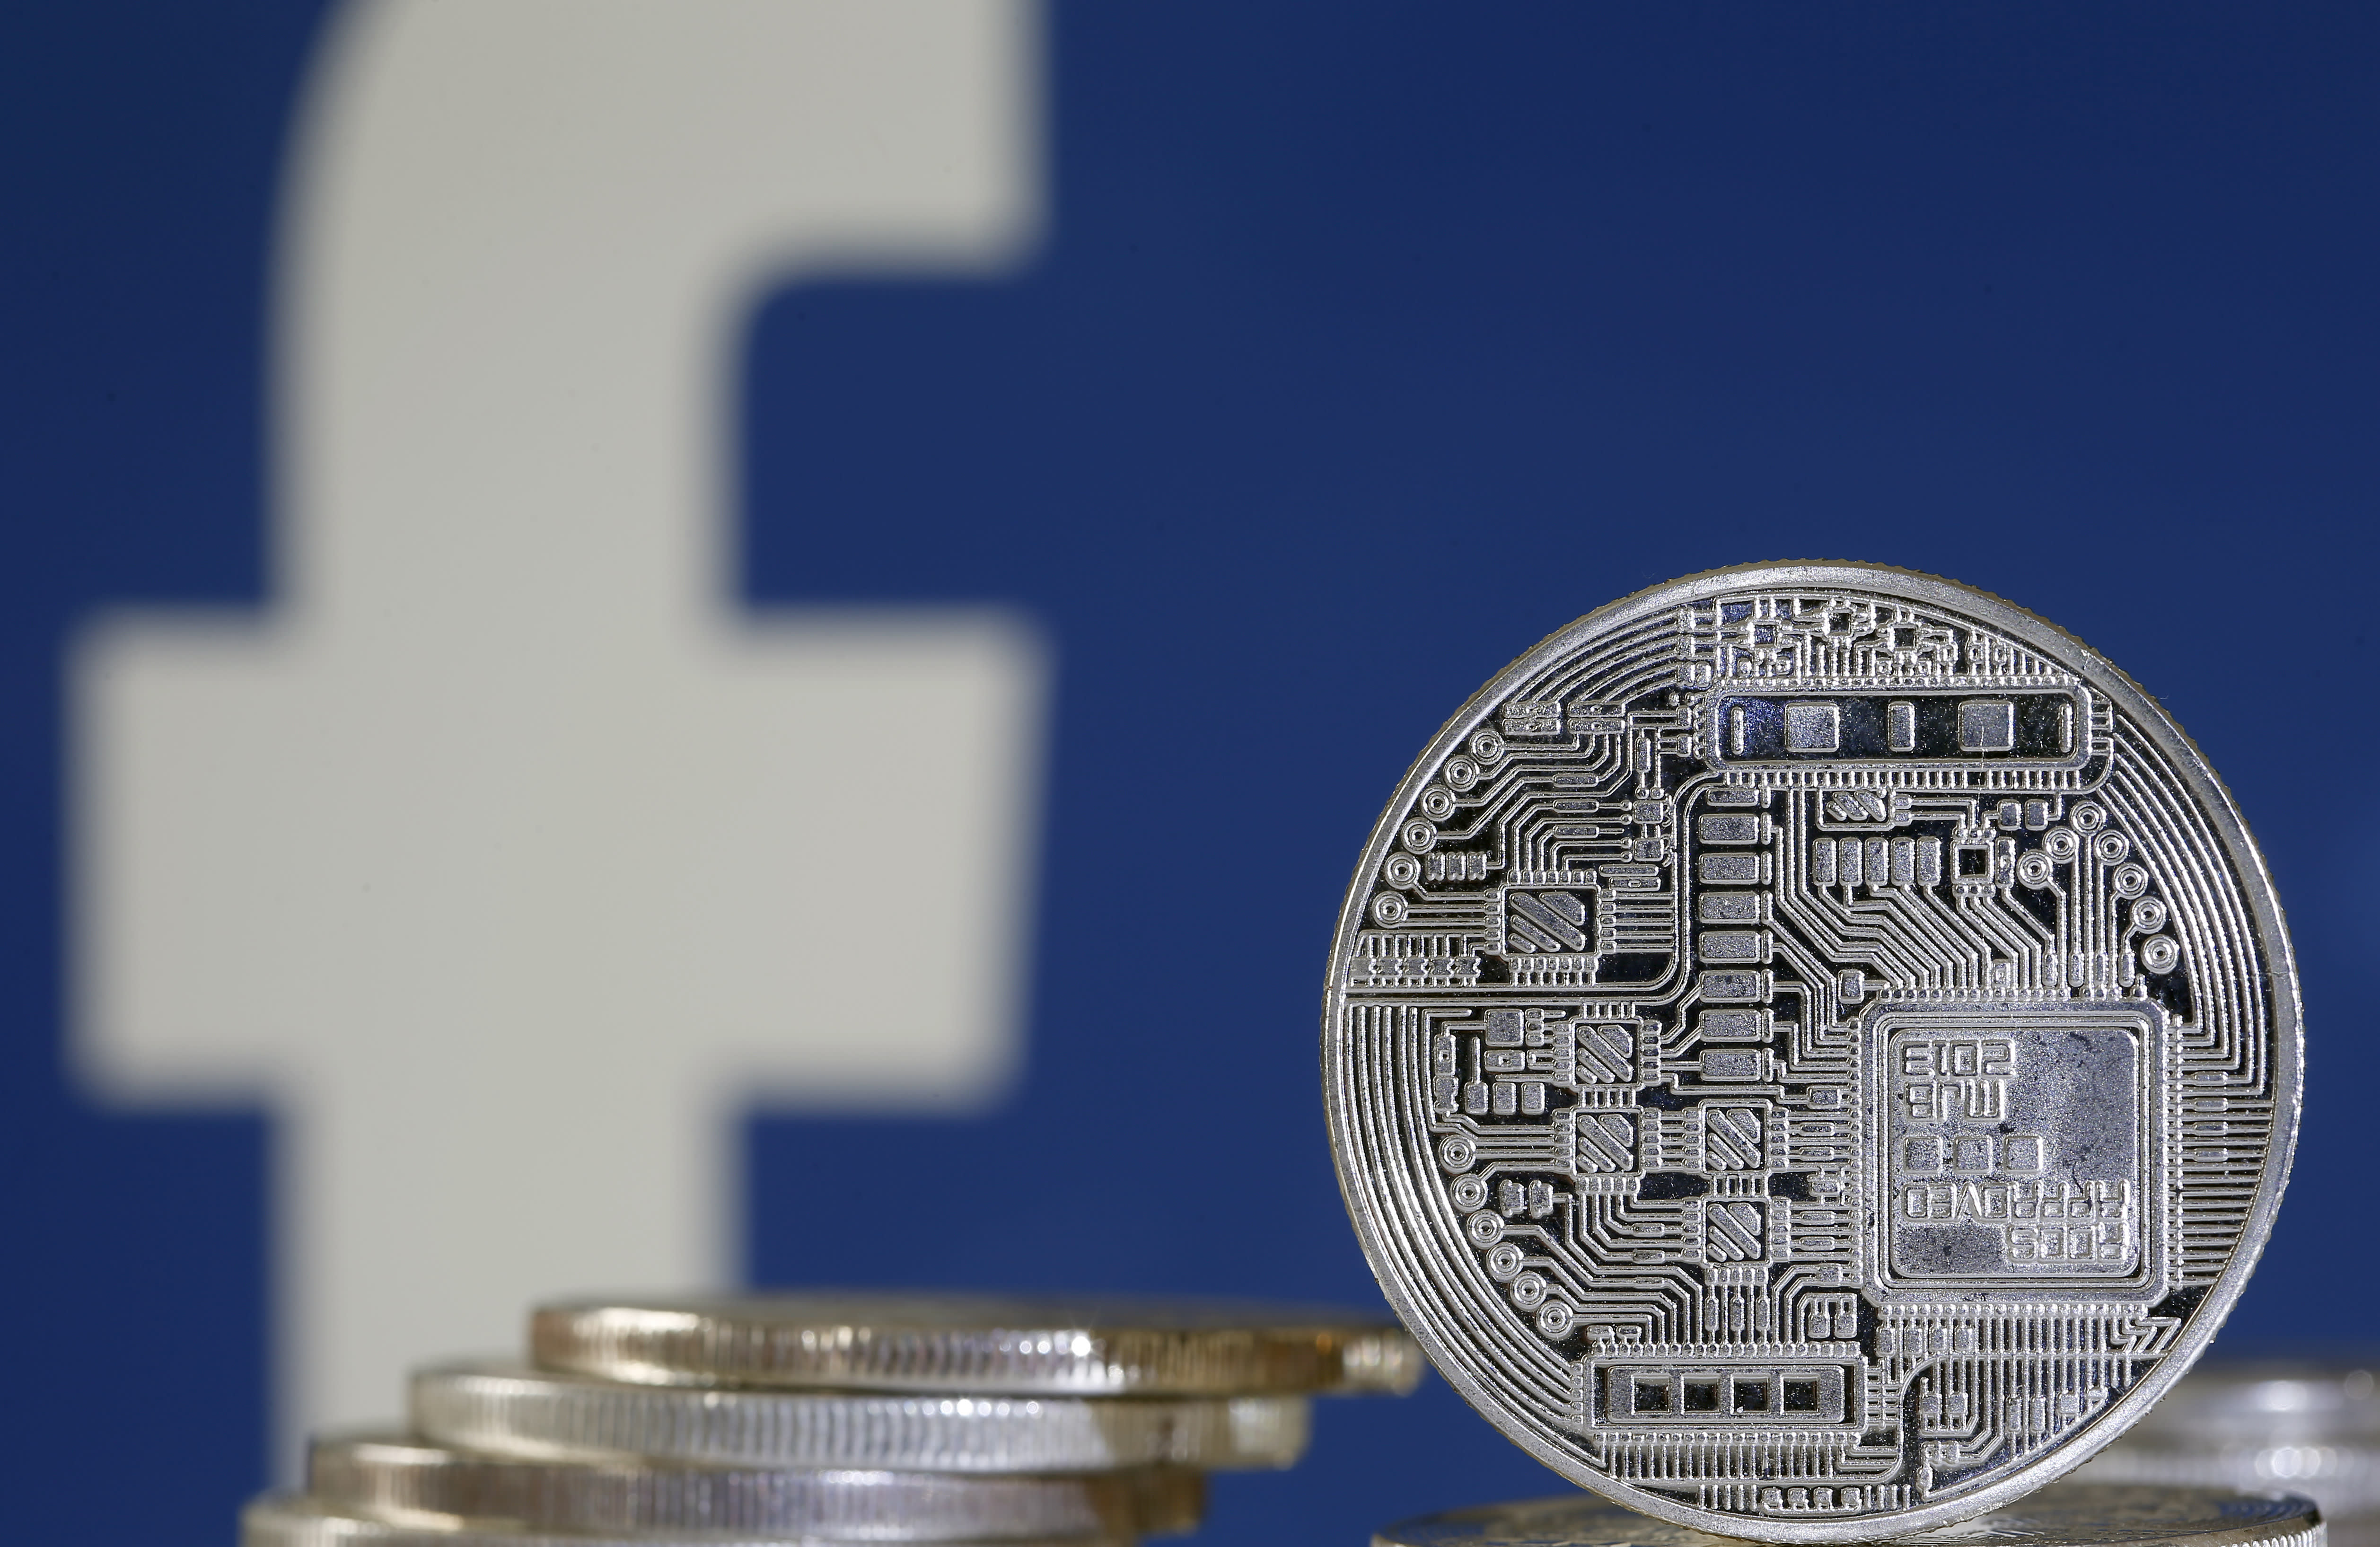 What is Libra? All you need to know about Facebook's new cryptocurrency | Facebook | The Guardian